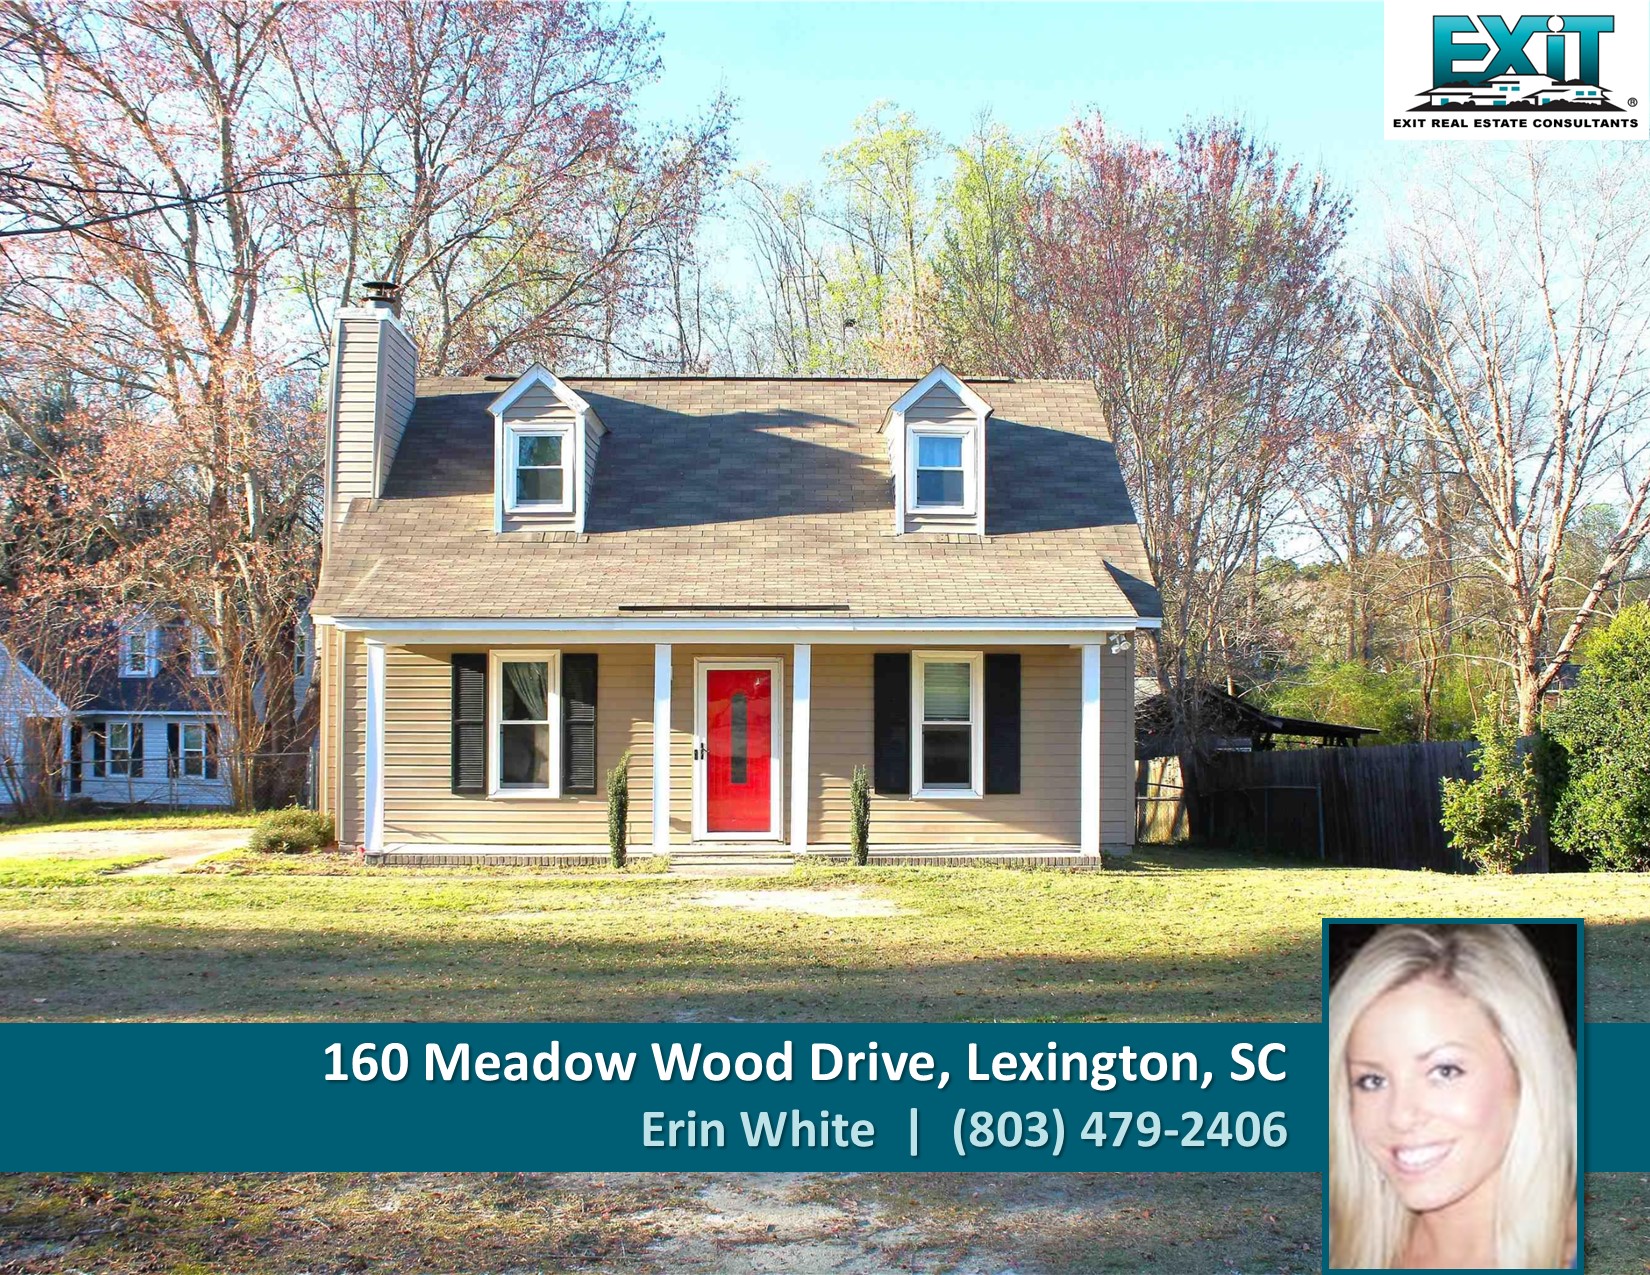 Just listed in Meadow Wood